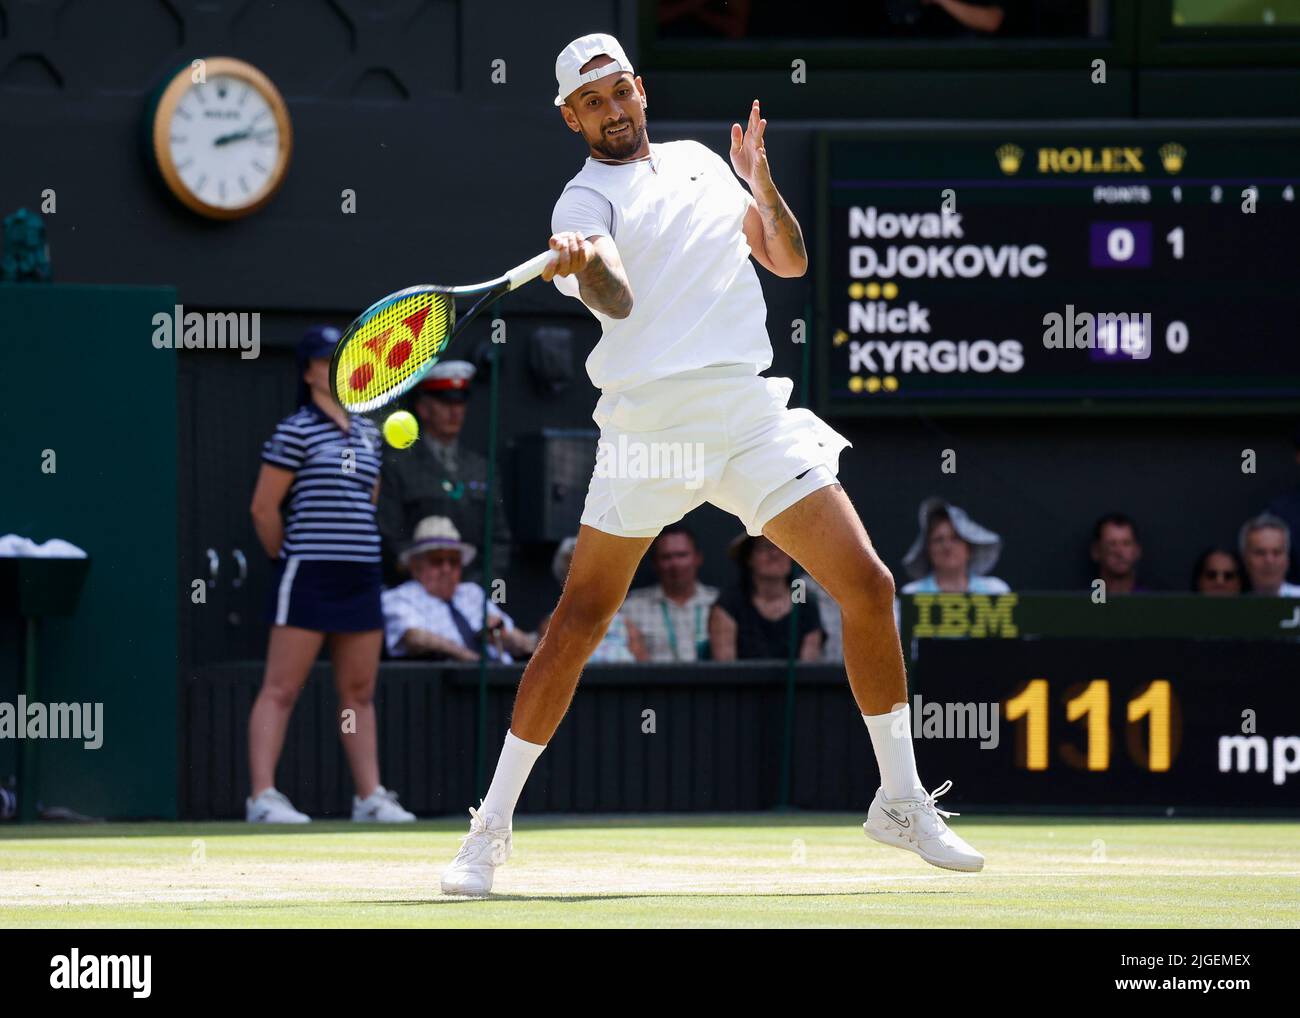 Wimbledon,Great Britain 10th. July, 2022. Australian tennis player Nick Kyrgios in action at the Wimbledon 2022  Championships on Sunday 10 July 2022.,  © Juergen Hasenkopf / Alamy Live News Stock Photo